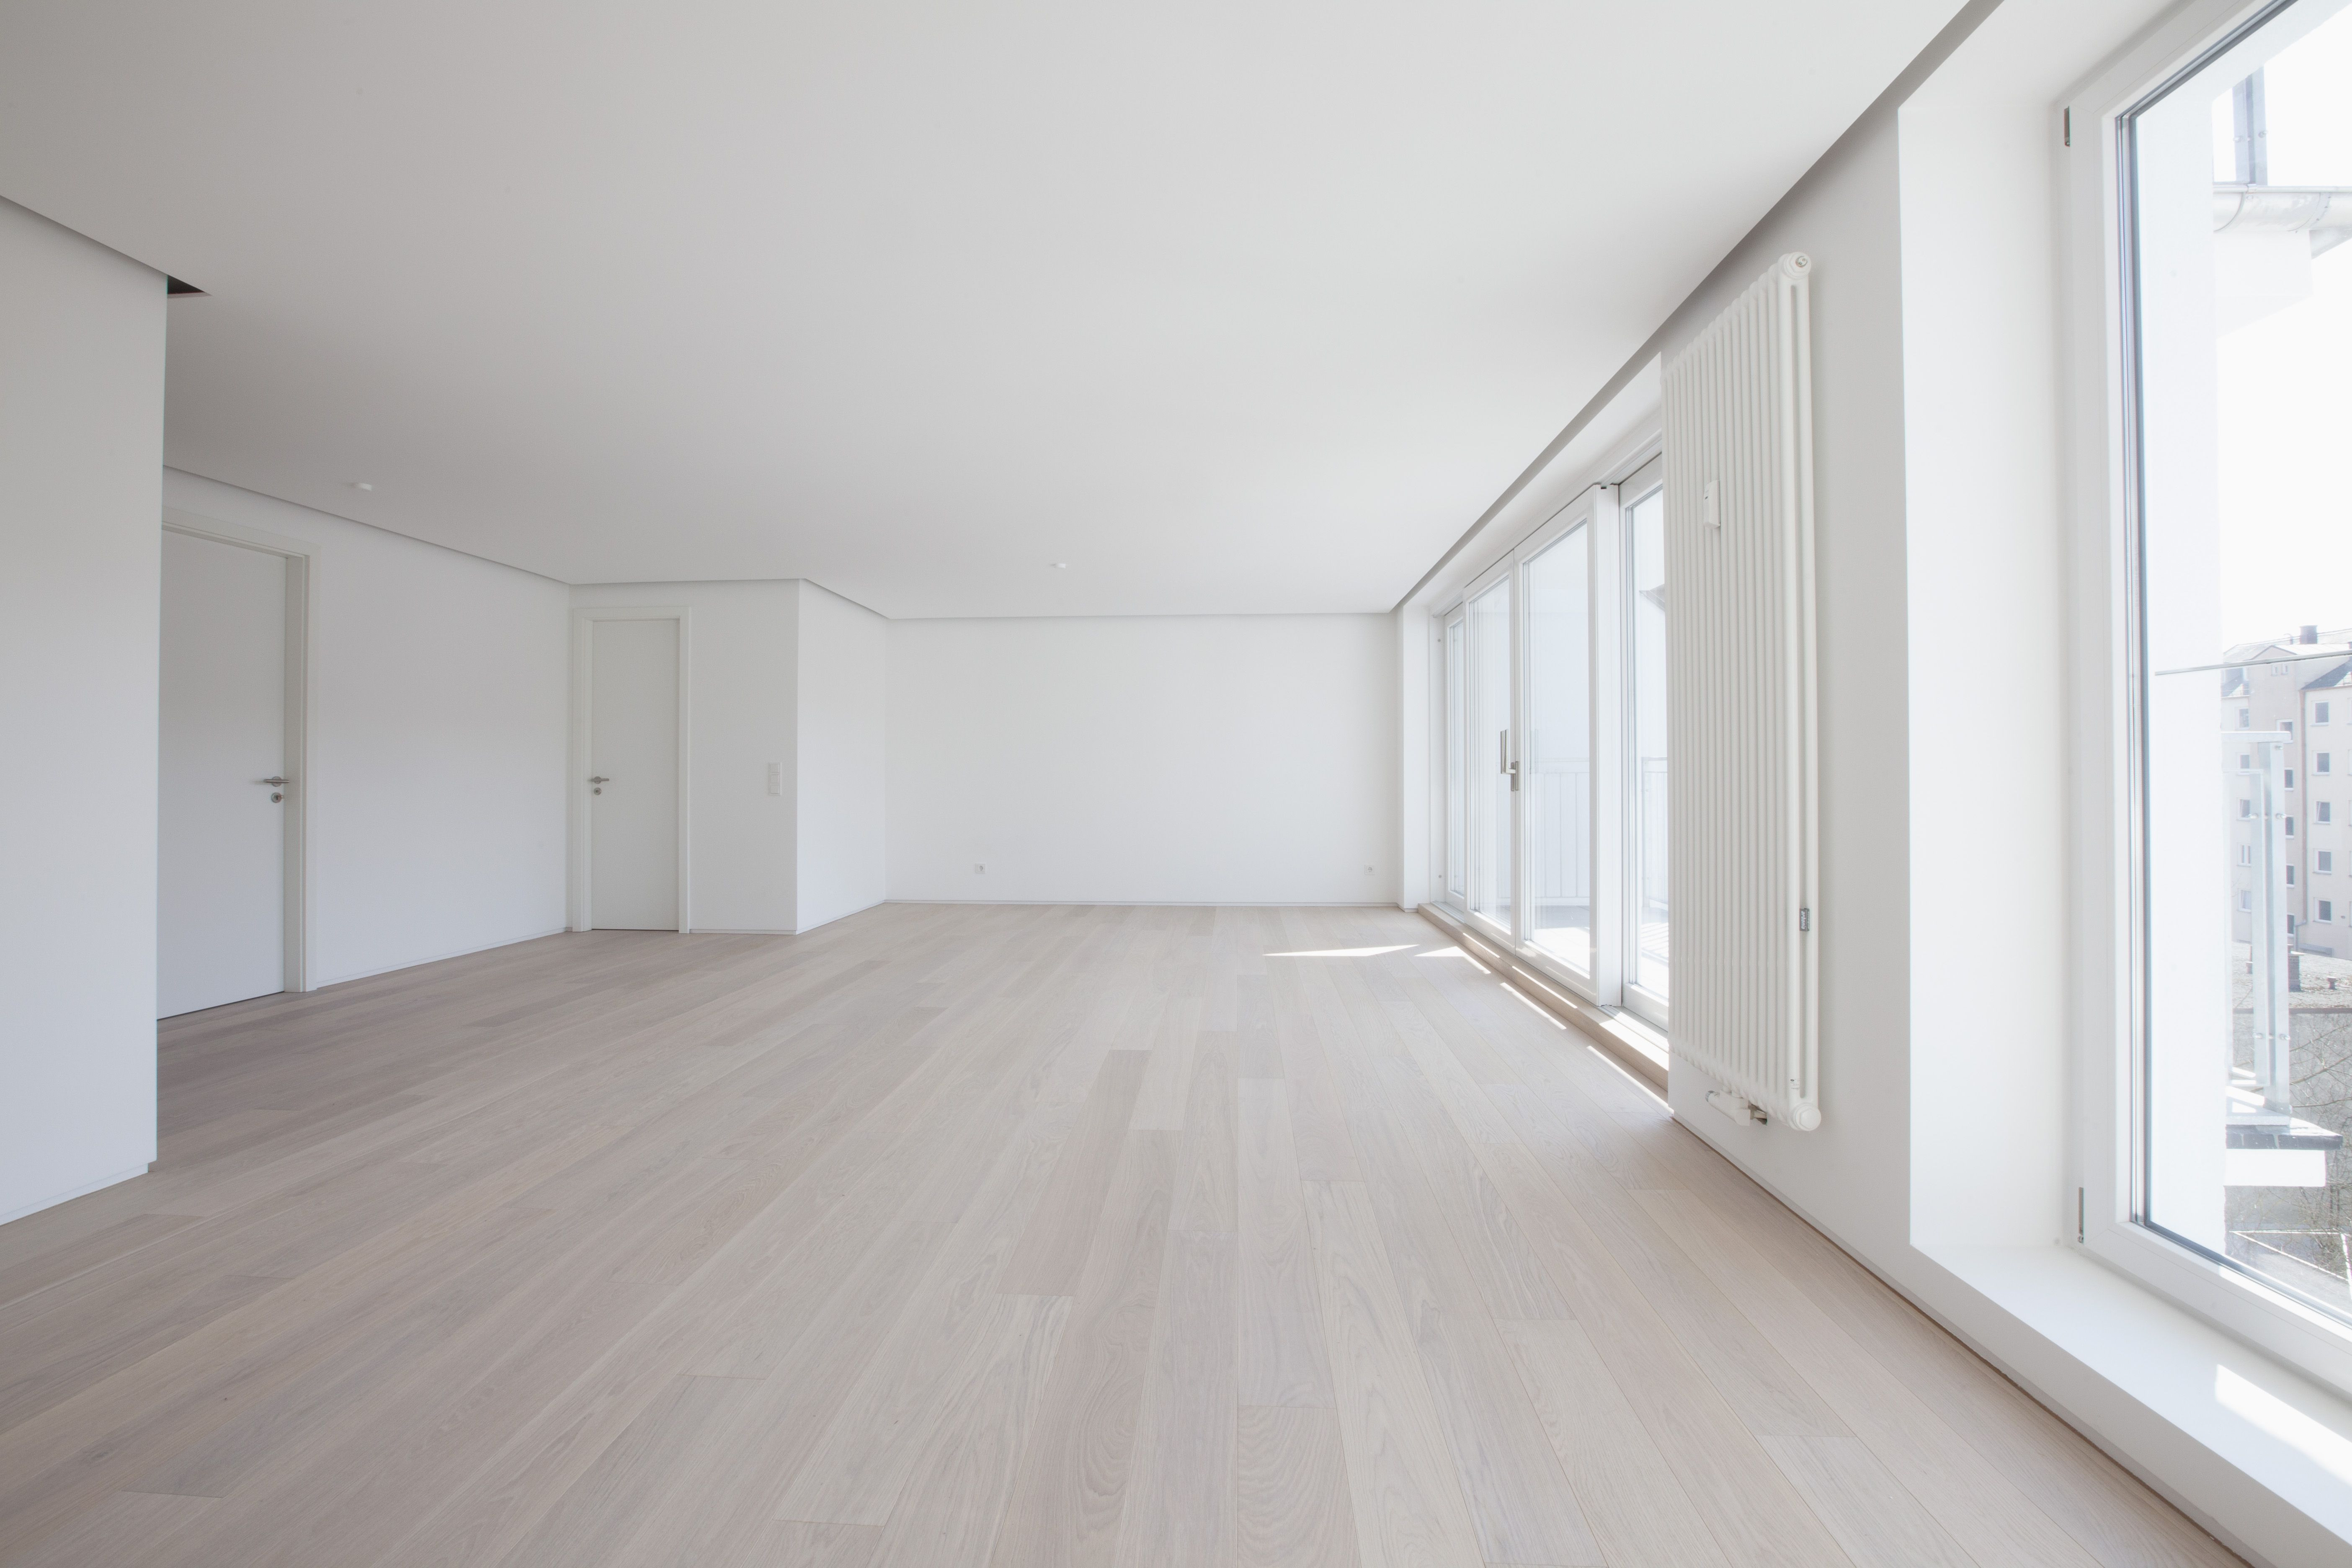 Install Bruce Hardwood Floors Yourself Of Basics Of Favorite Hybrid Engineered Wood Floors Intended for Empty Living Room In Modern Apartment 578189139 58866f903df78c2ccdecab05